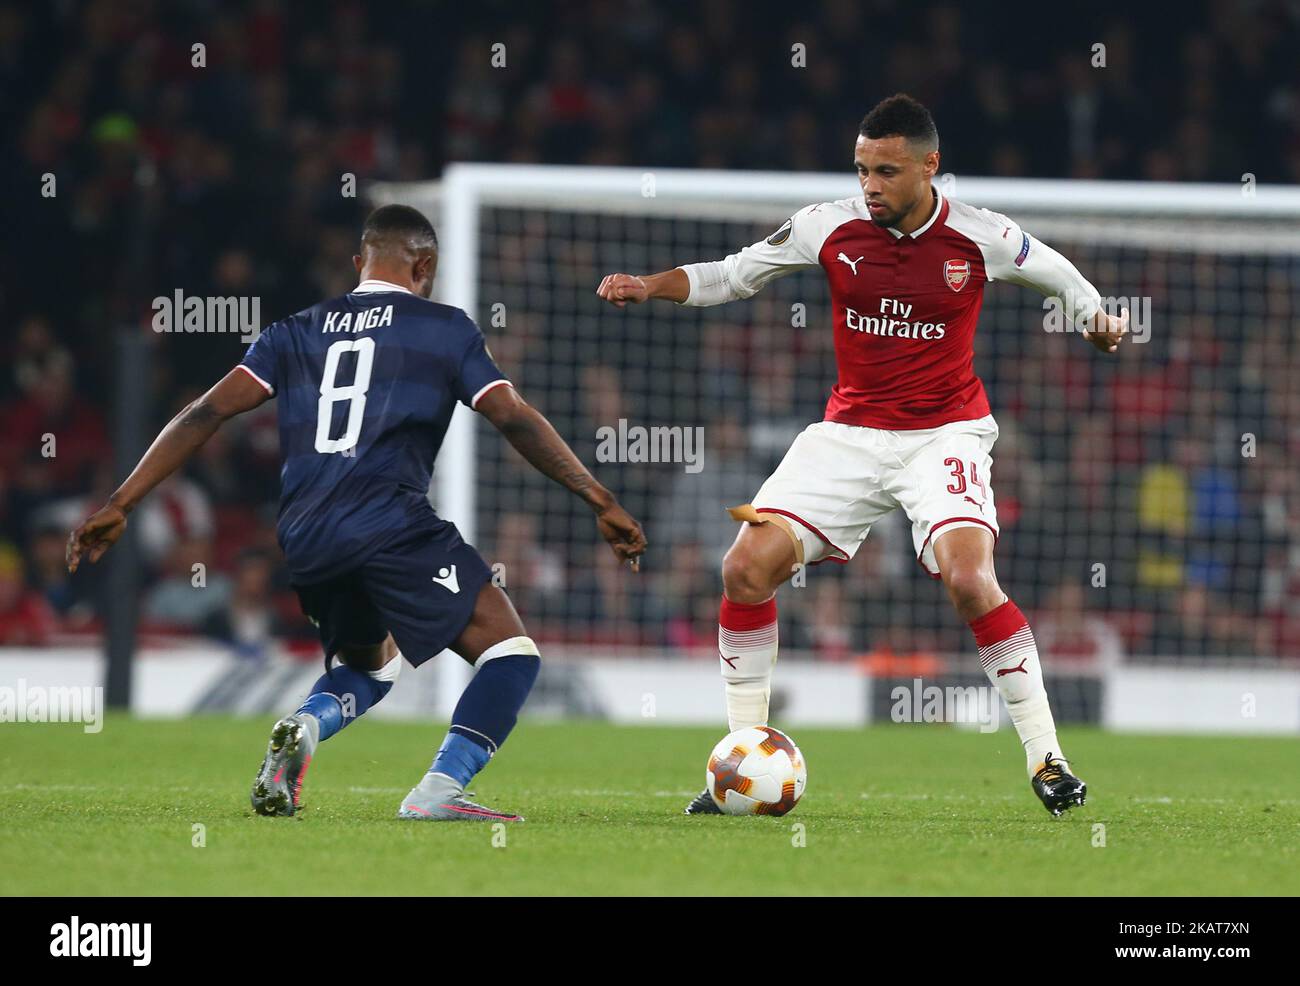 Arsenal's Francis Coquelin during UEFA Europa League Group H match between Arsenal and Red Star Belgrade (Crvena Zvezda) at The Emirates, in London, UK on November 2, 2017. (Photo by Kieran Galvin/NurPhoto)  Stock Photo